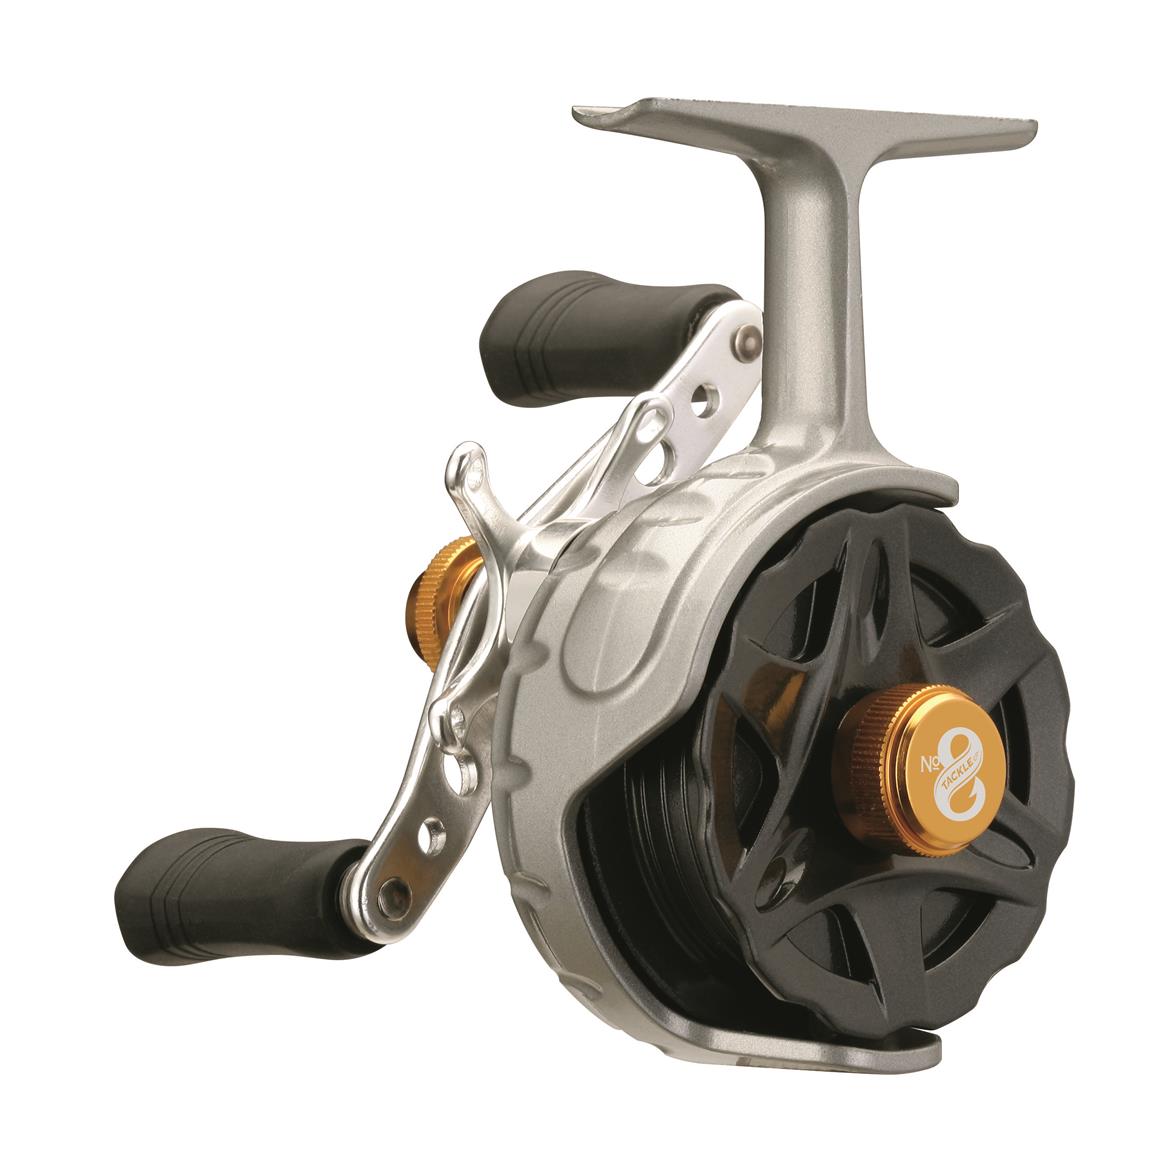 No. 8 Tackle Co. CGi Cold Gear Inline Ice Fishing Reel